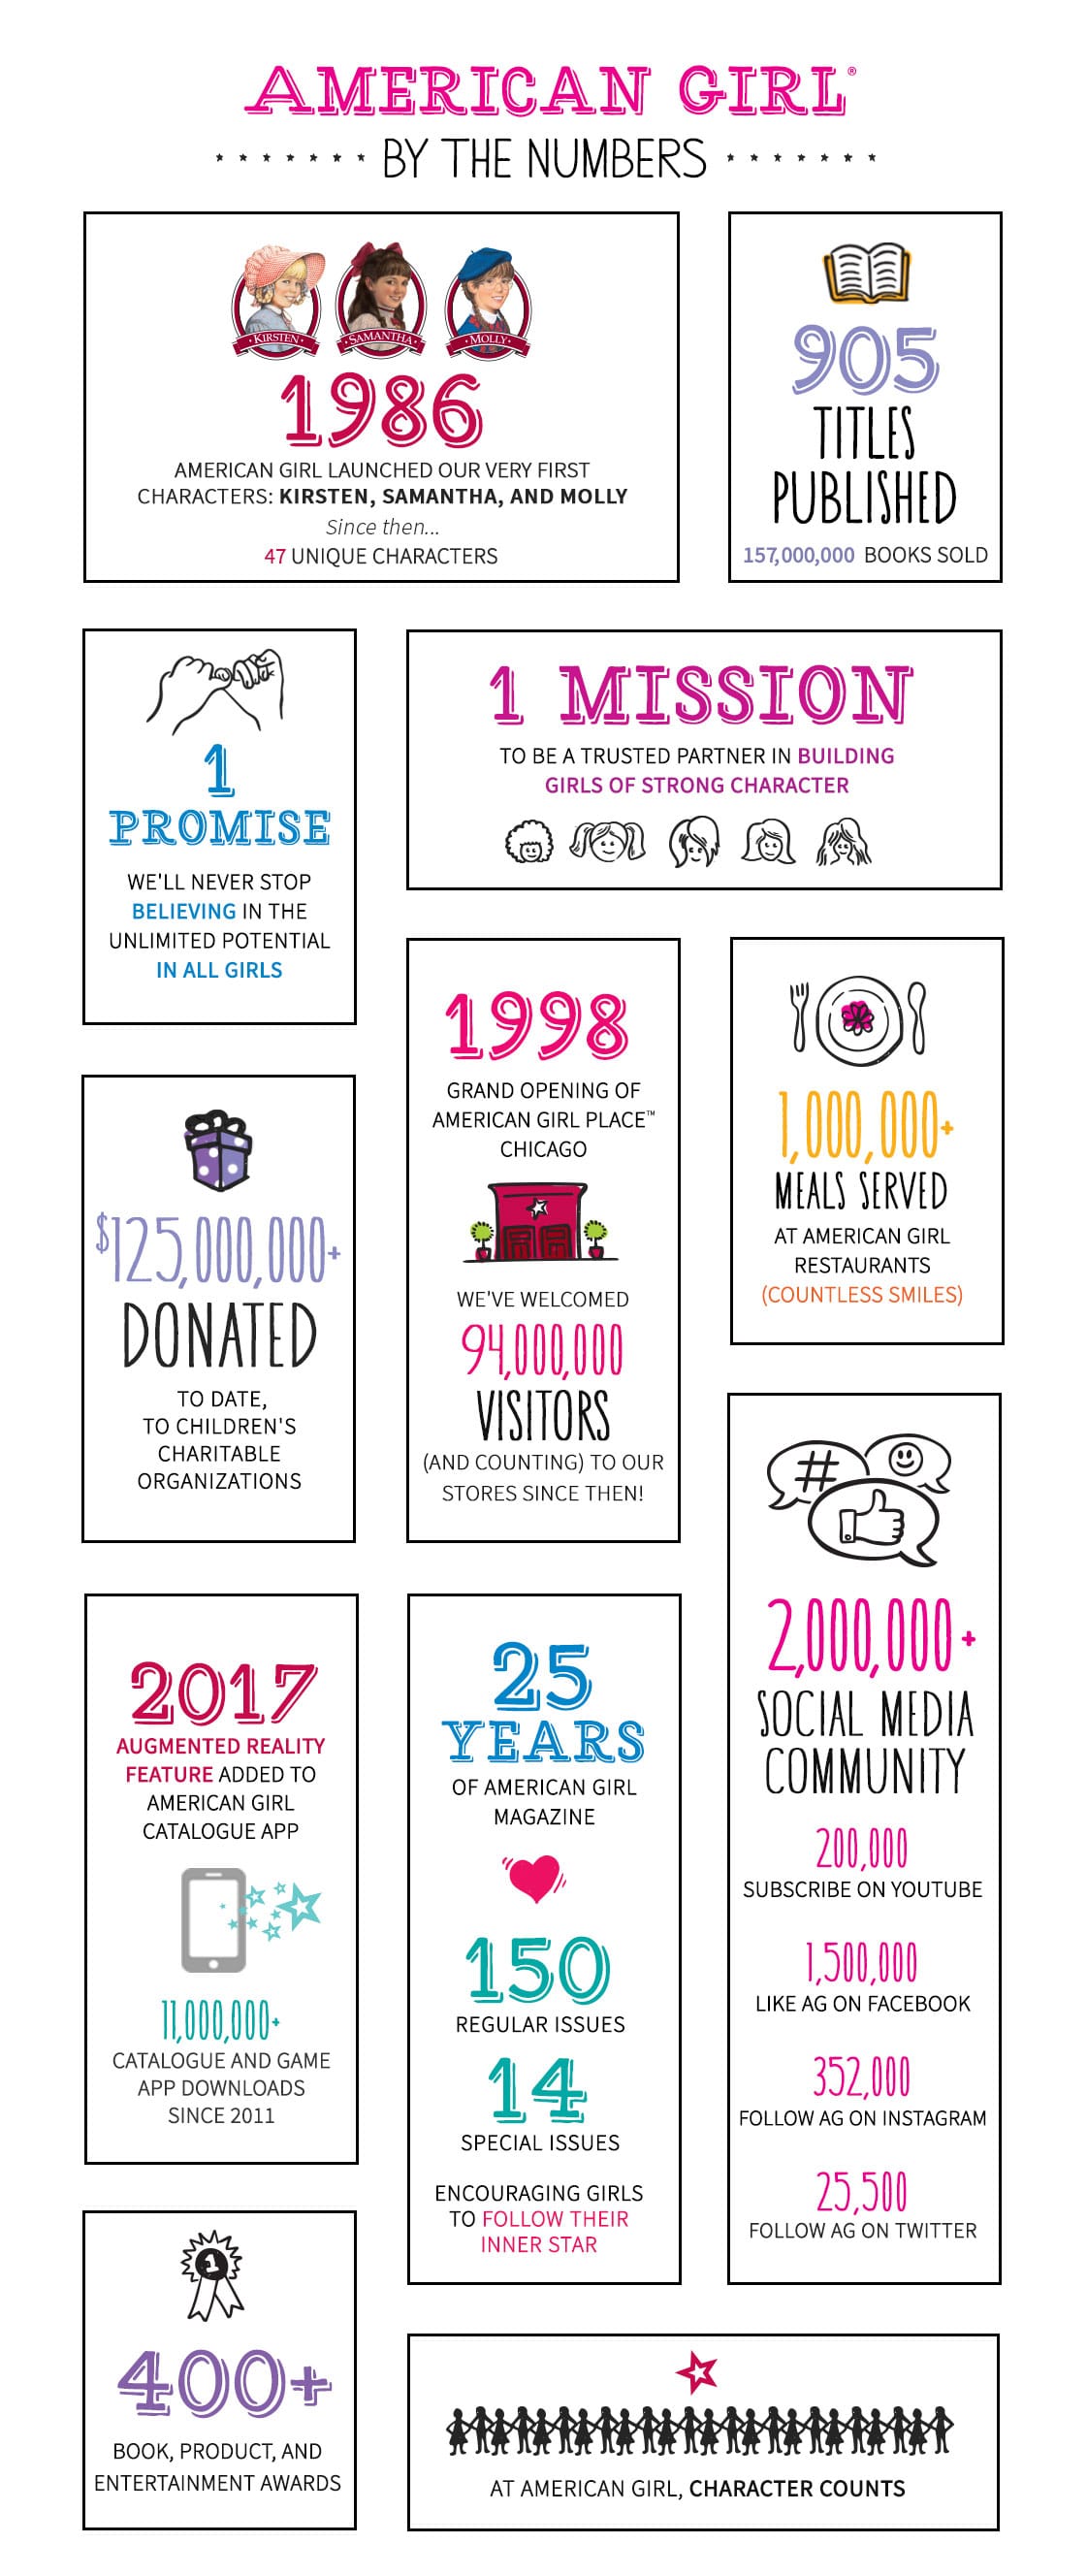 american-girl-by-the-numbers-infographic-instagram.jpg